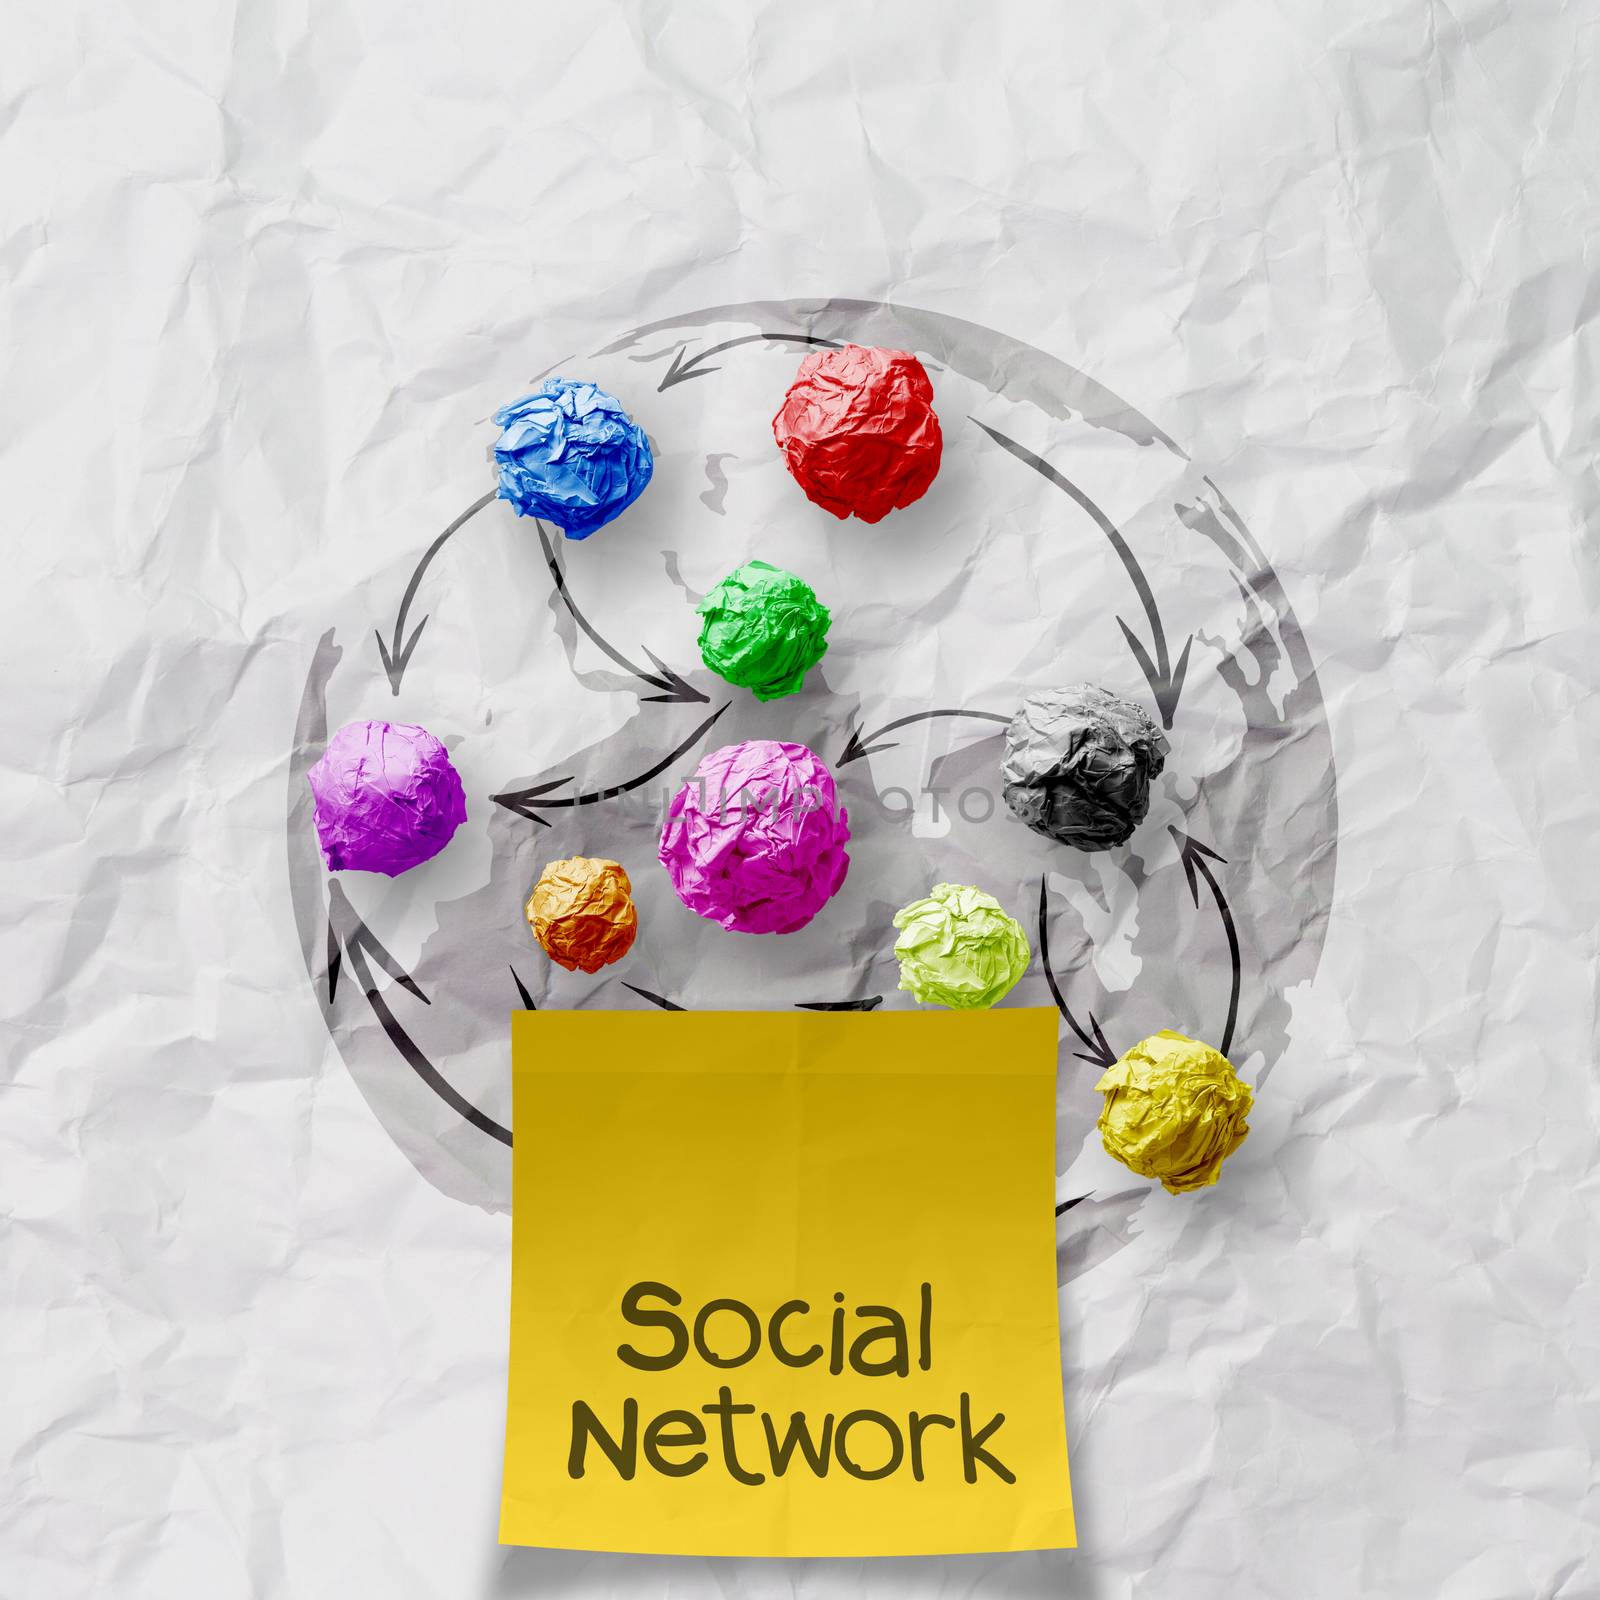 hand pushing sticky note social network on crumpled paper background as concept